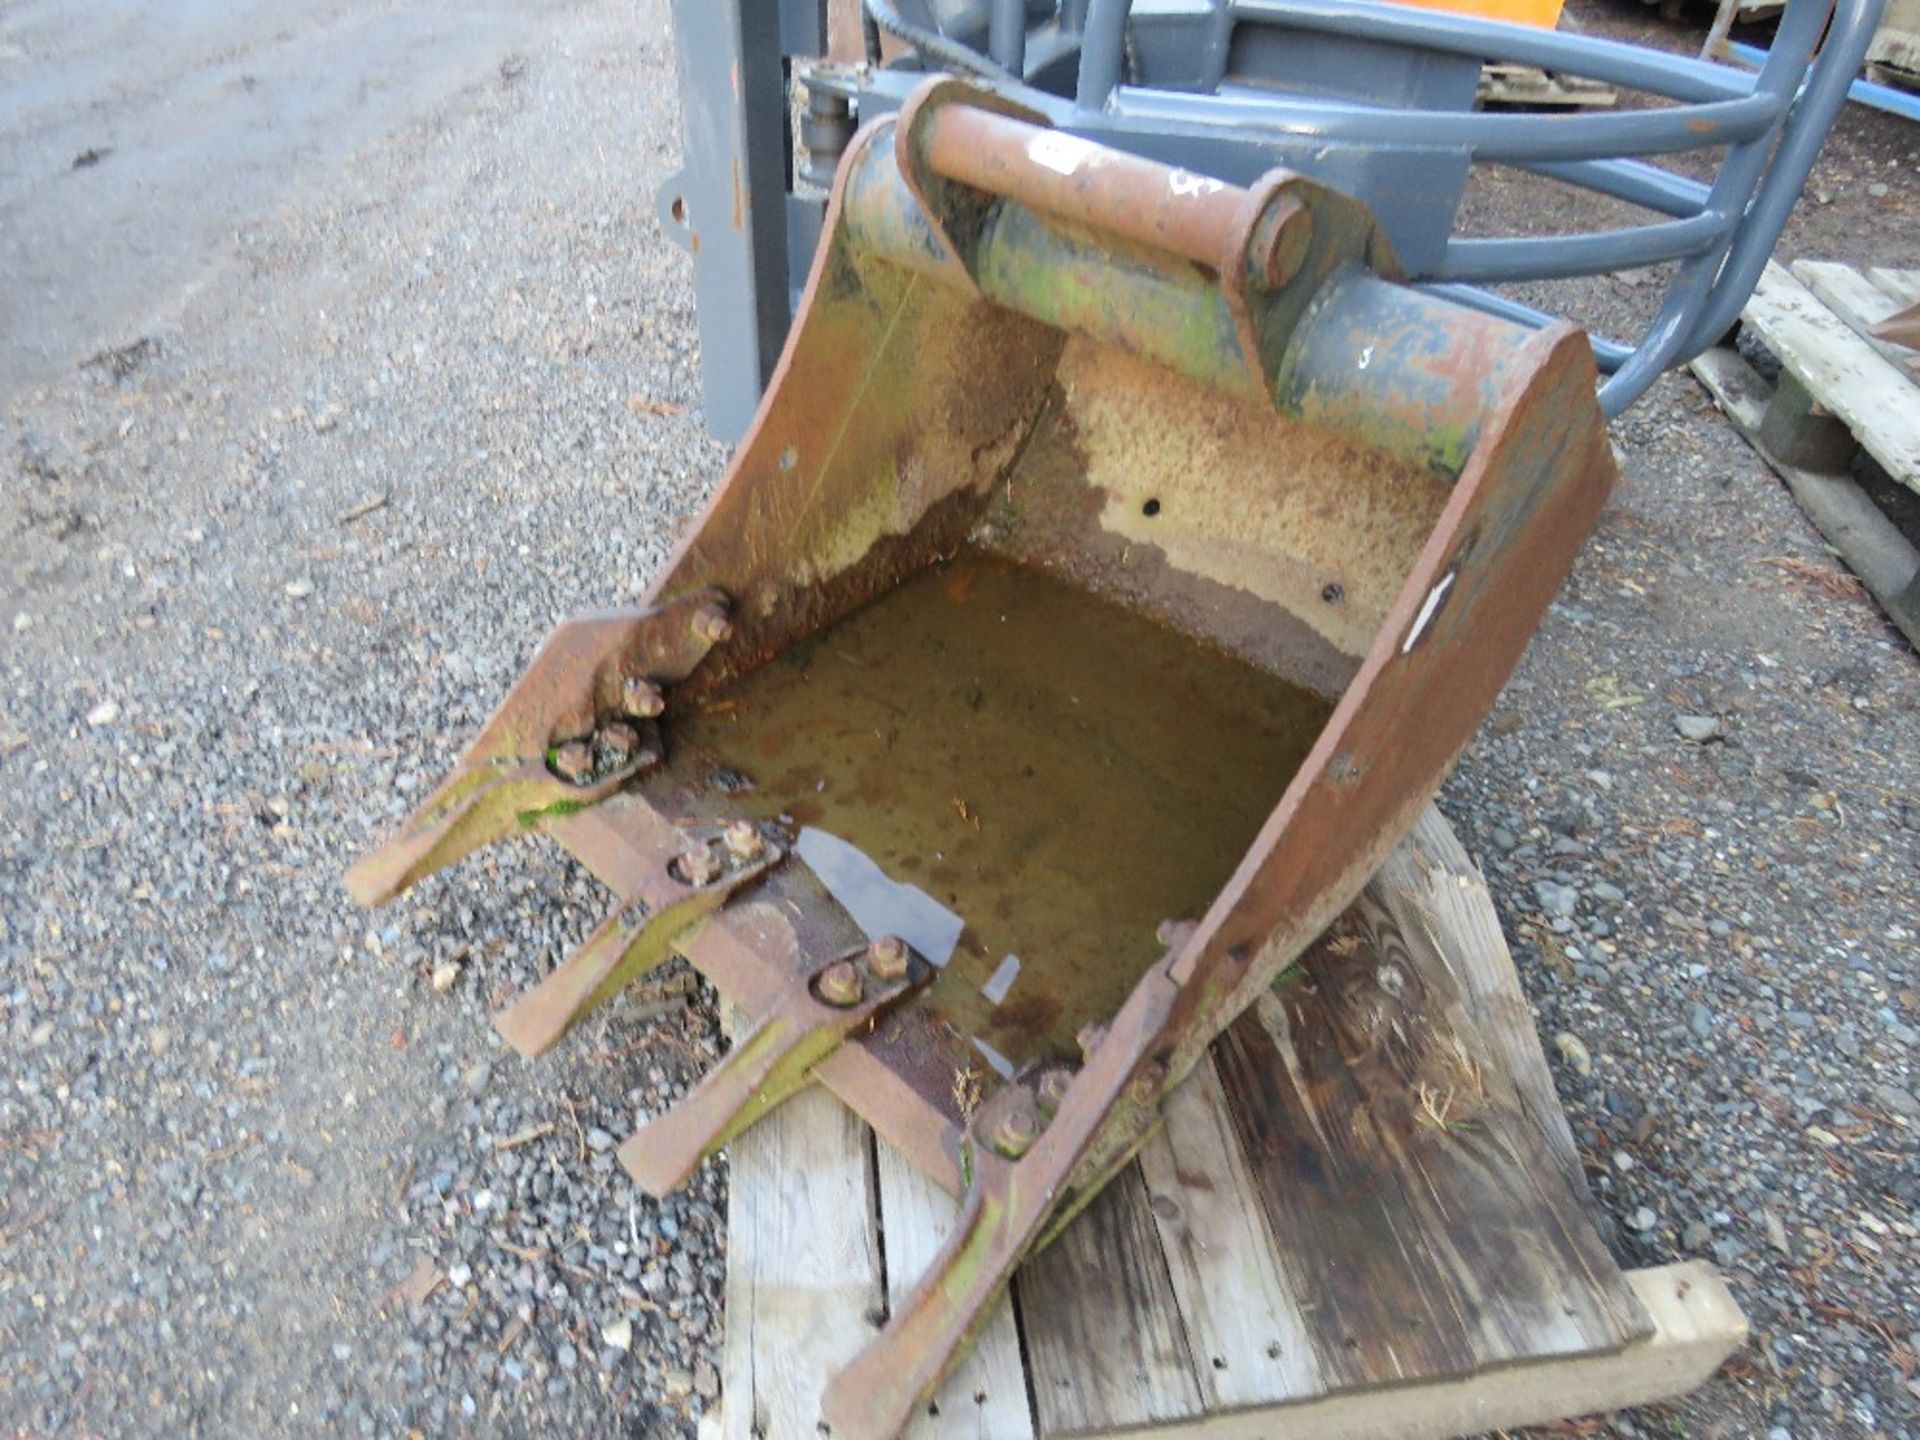 2FT WIDE EXCAVATOR BUCKET ON 45MM KLAC FIXINGS.. DIRECT FROM A LOCAL GROUNDWORKS COMPANY AS PART